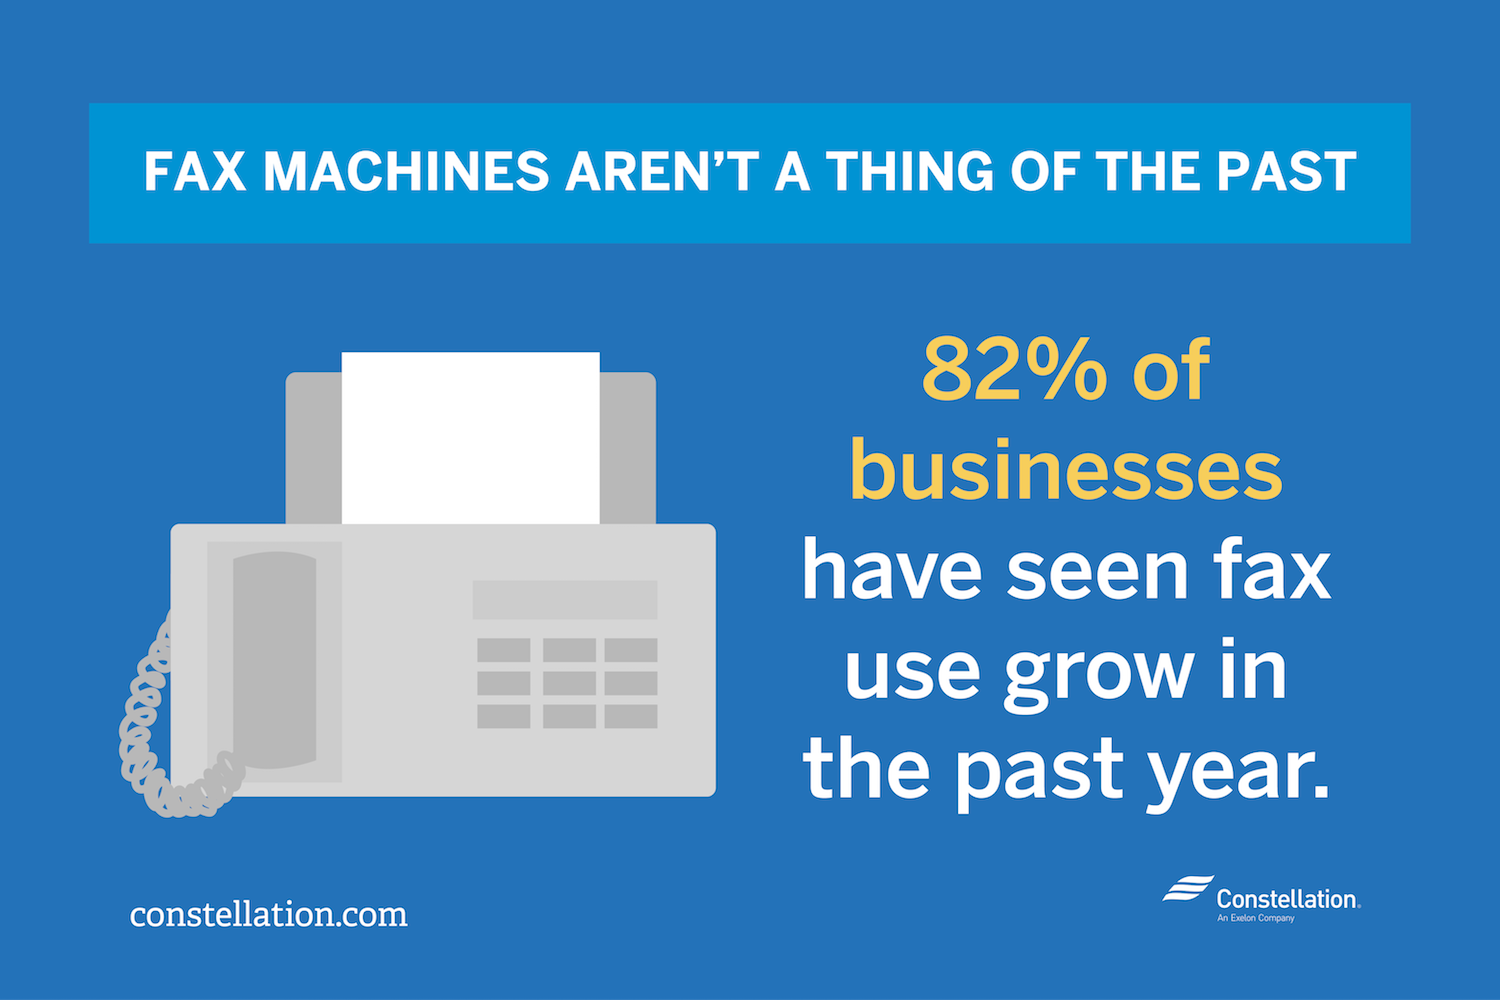 Small businesses have seen fax machine use grow